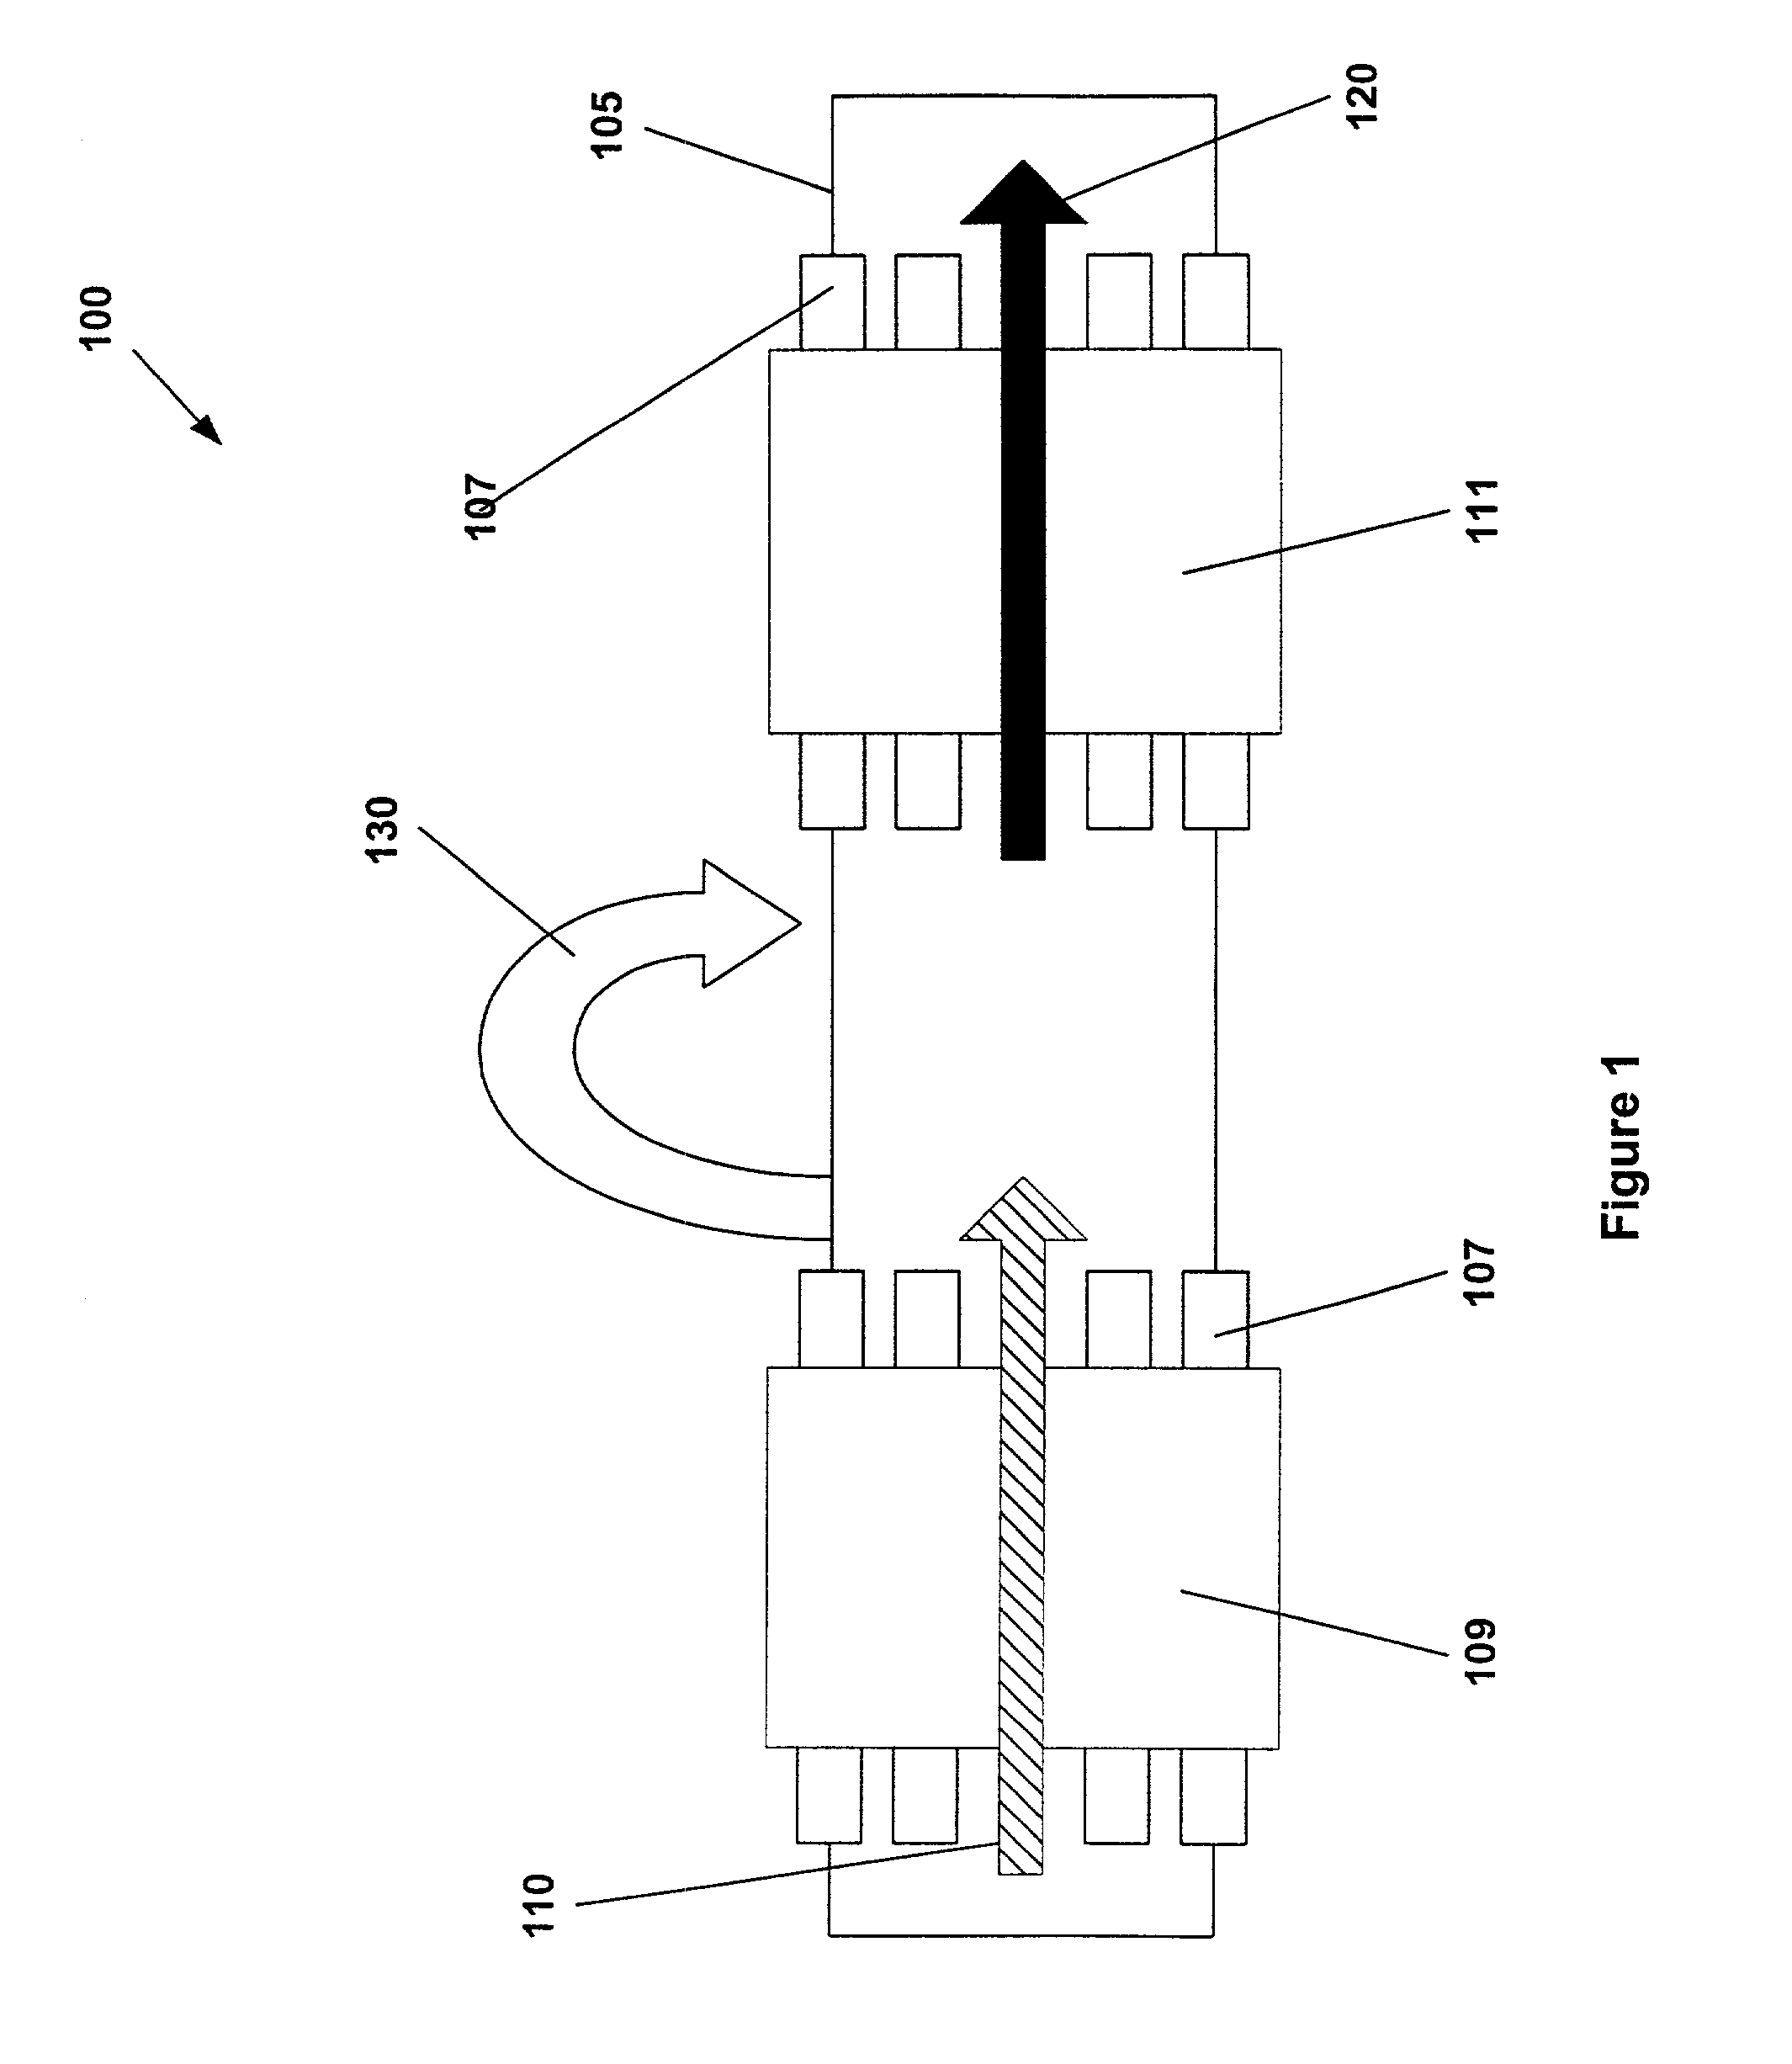 Multi-component induction instrument